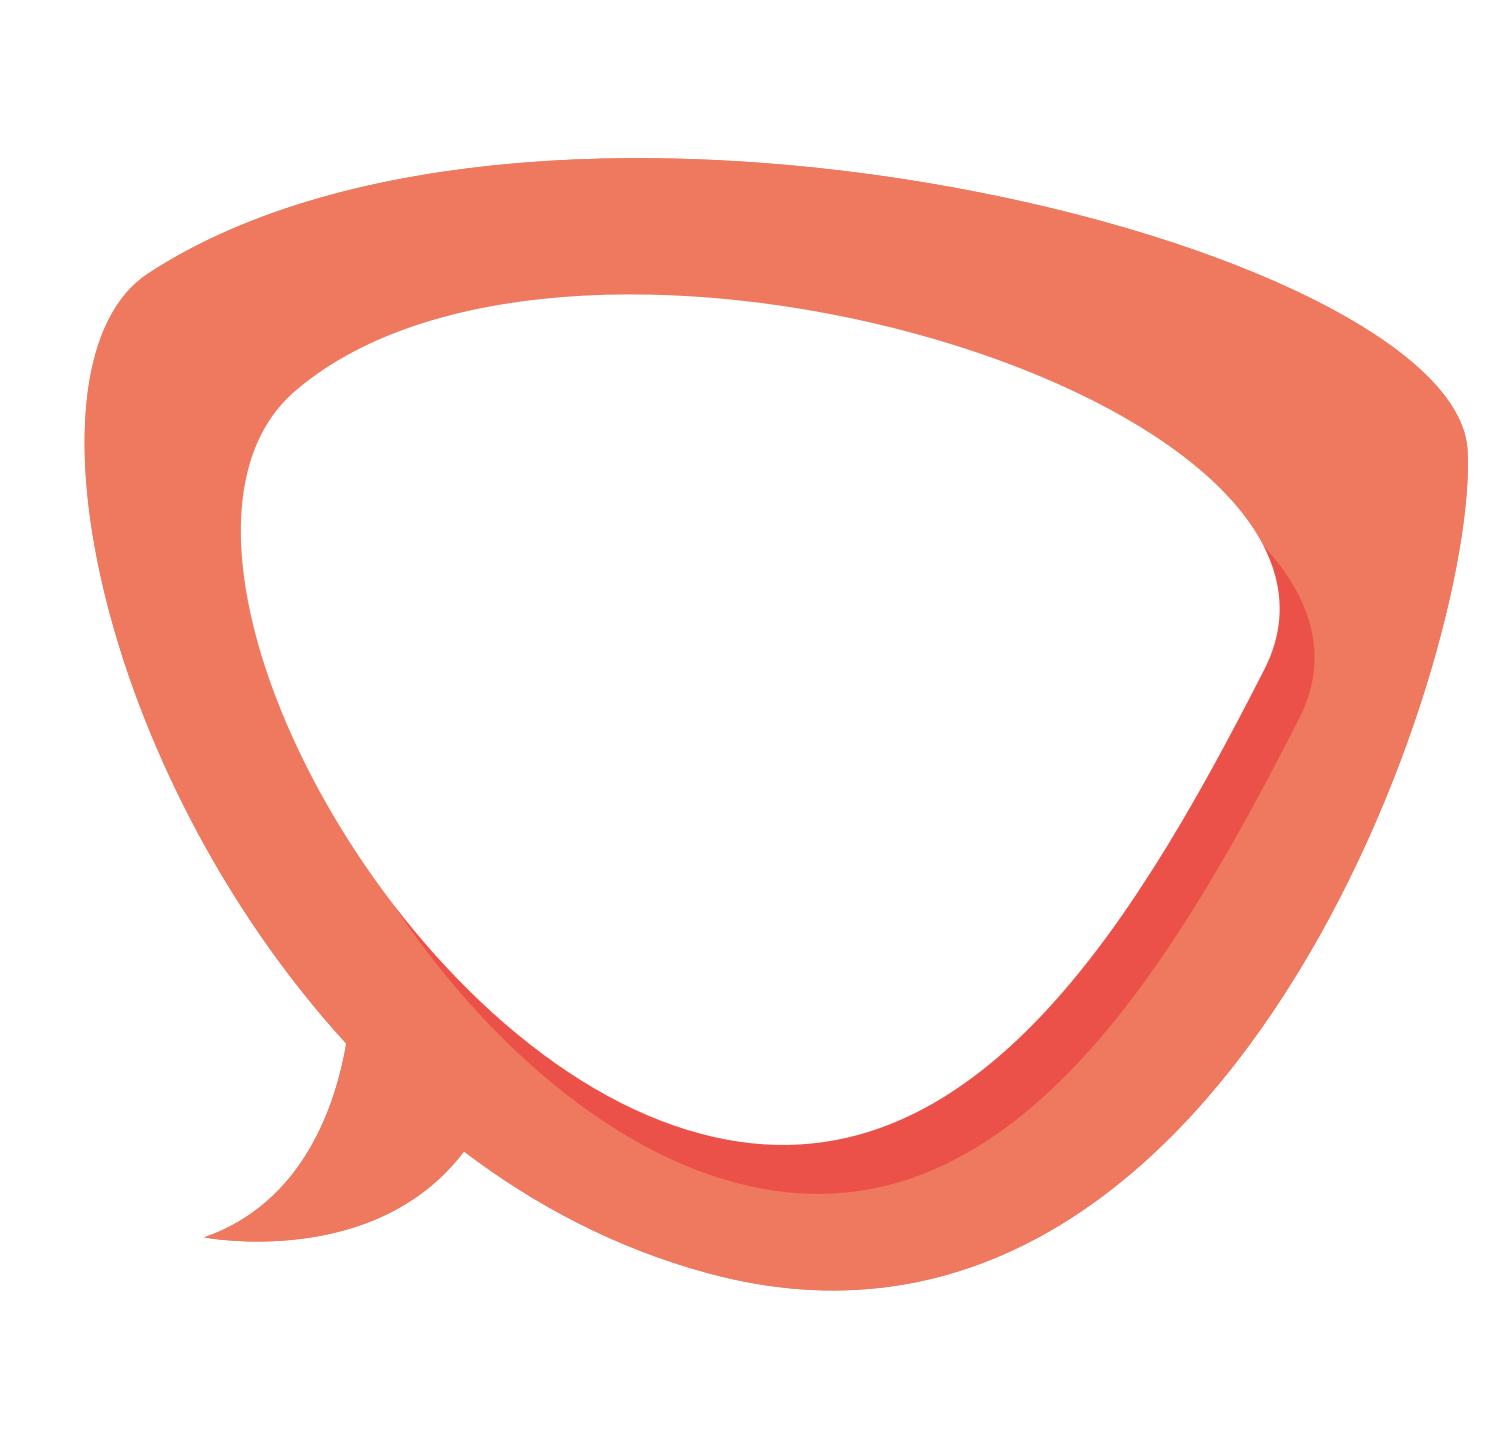 Text Bubble PNG Image HD